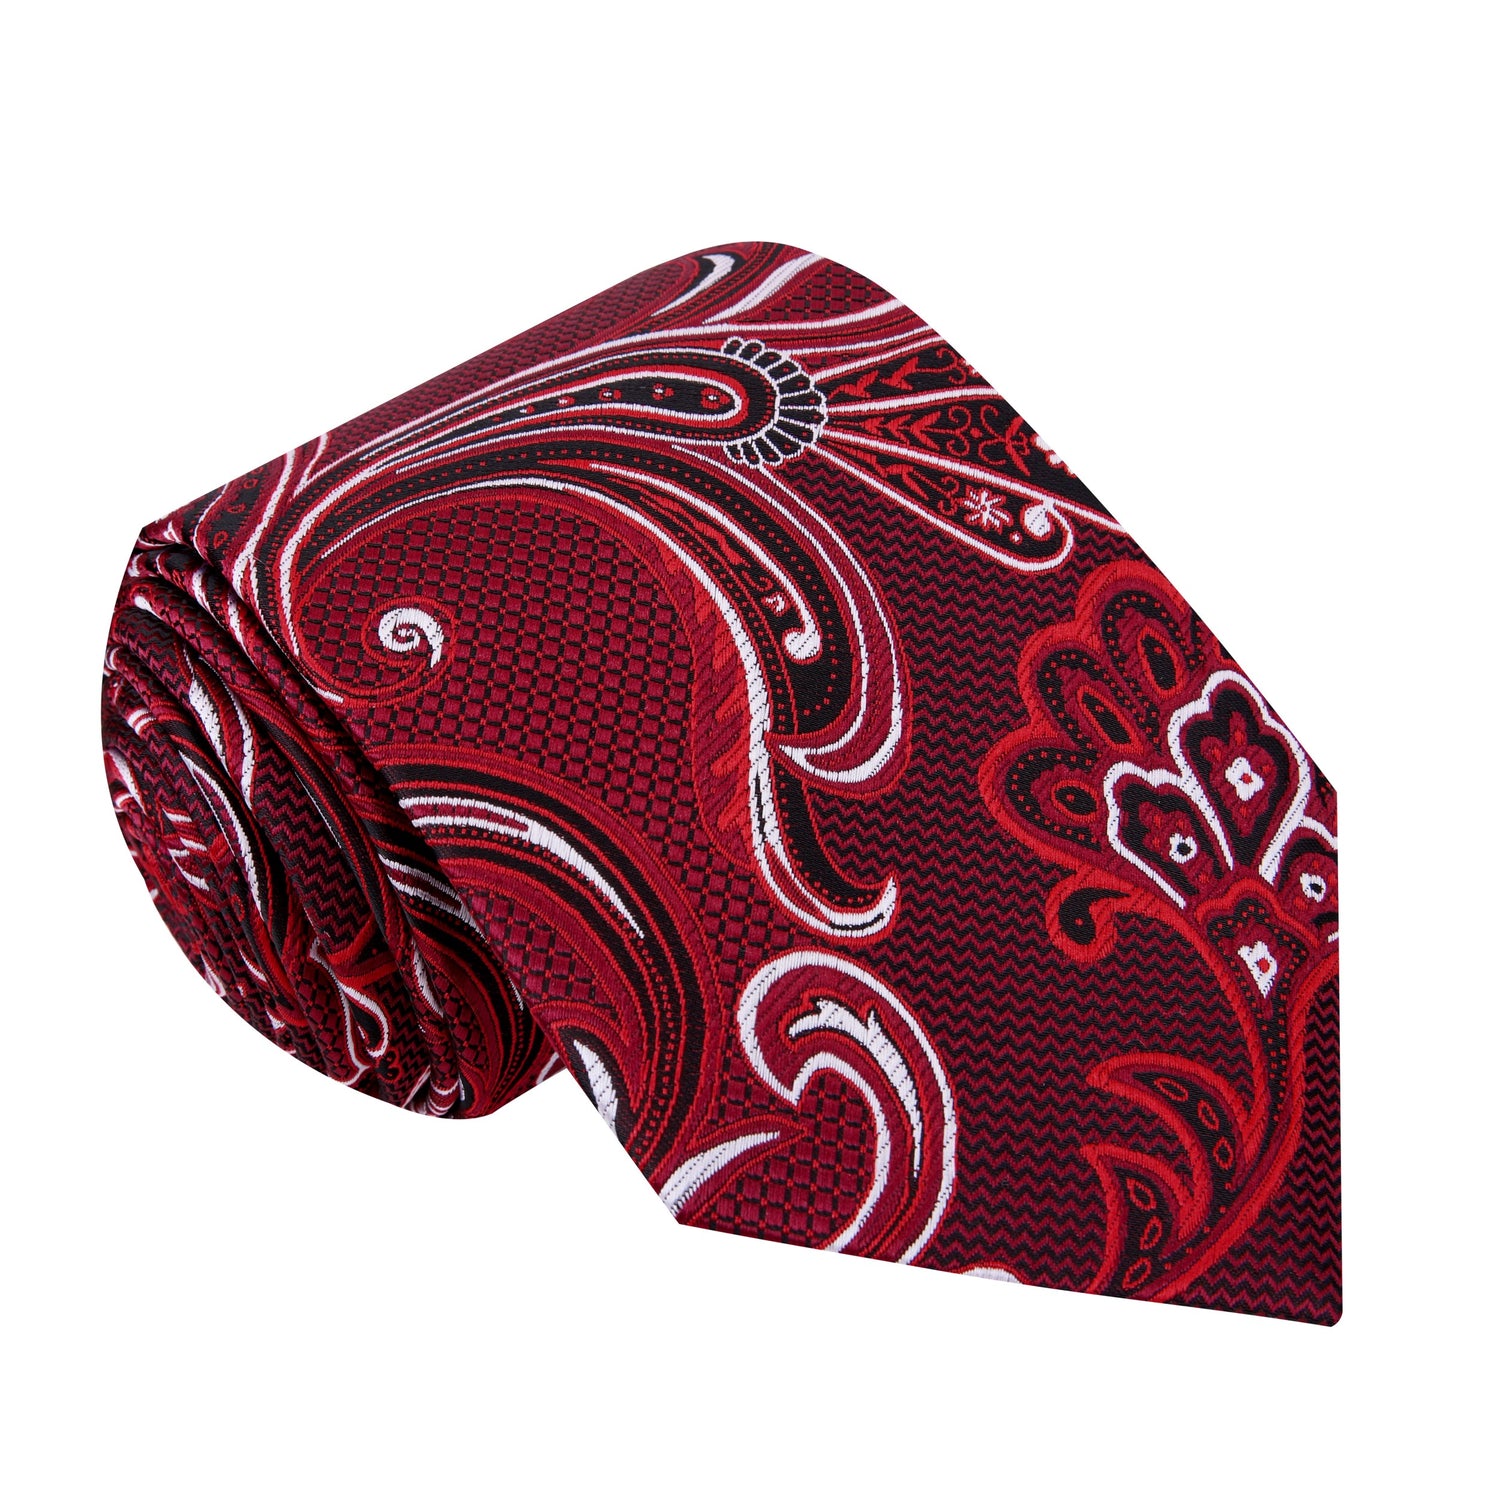 A Red, White, Black Color Paisley Pattern Silk Necktie 